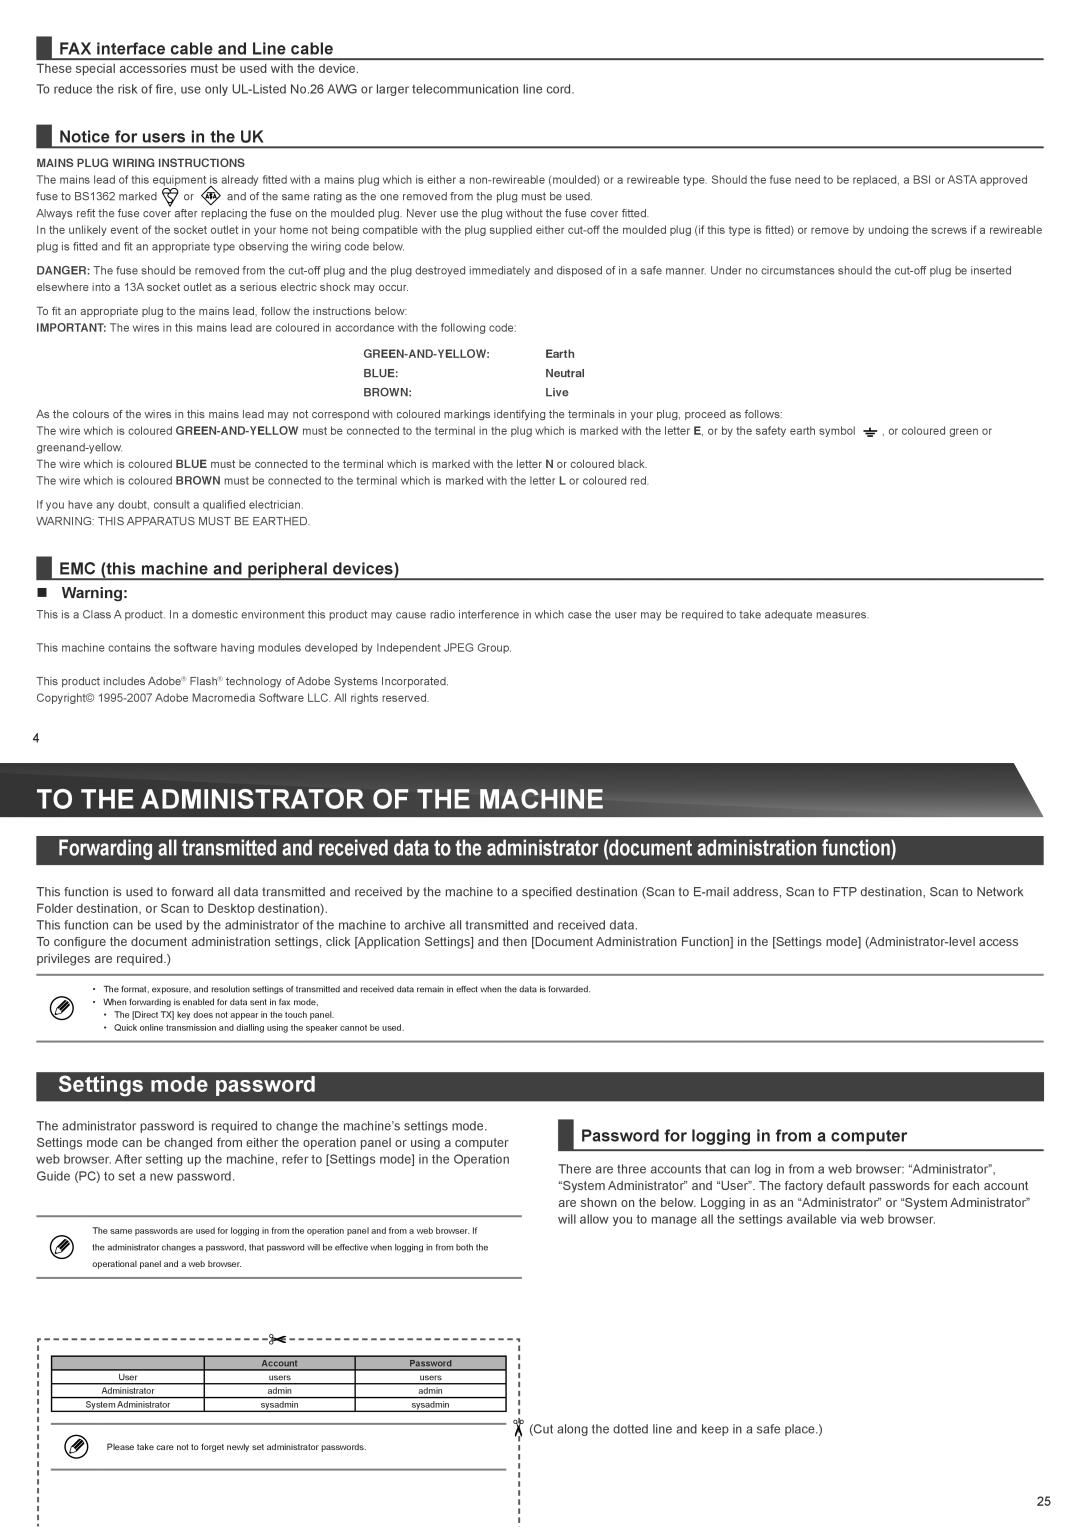 Sharp MX-2610N To The Administrator Of The Machine, Settings mode password, FAX interface cable and Line cable, „„ Warning 